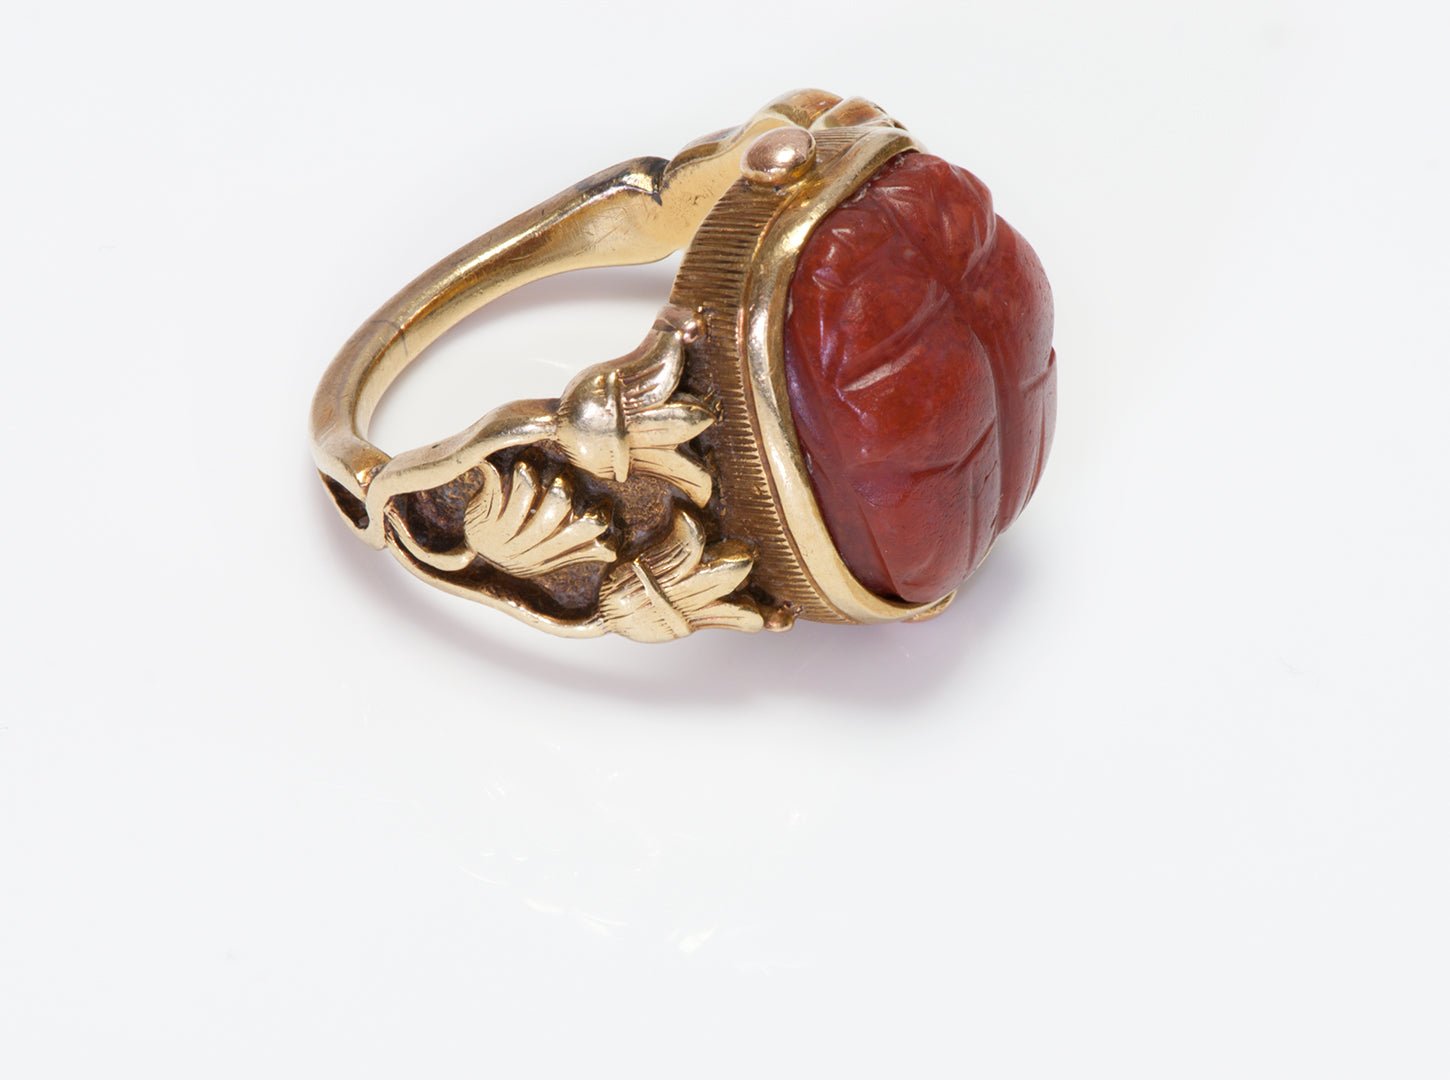 Antique Tiffany & Co. 18K Gold Carved Stone Scarab Ring by Gustav Manz - DSF Antique Jewelry